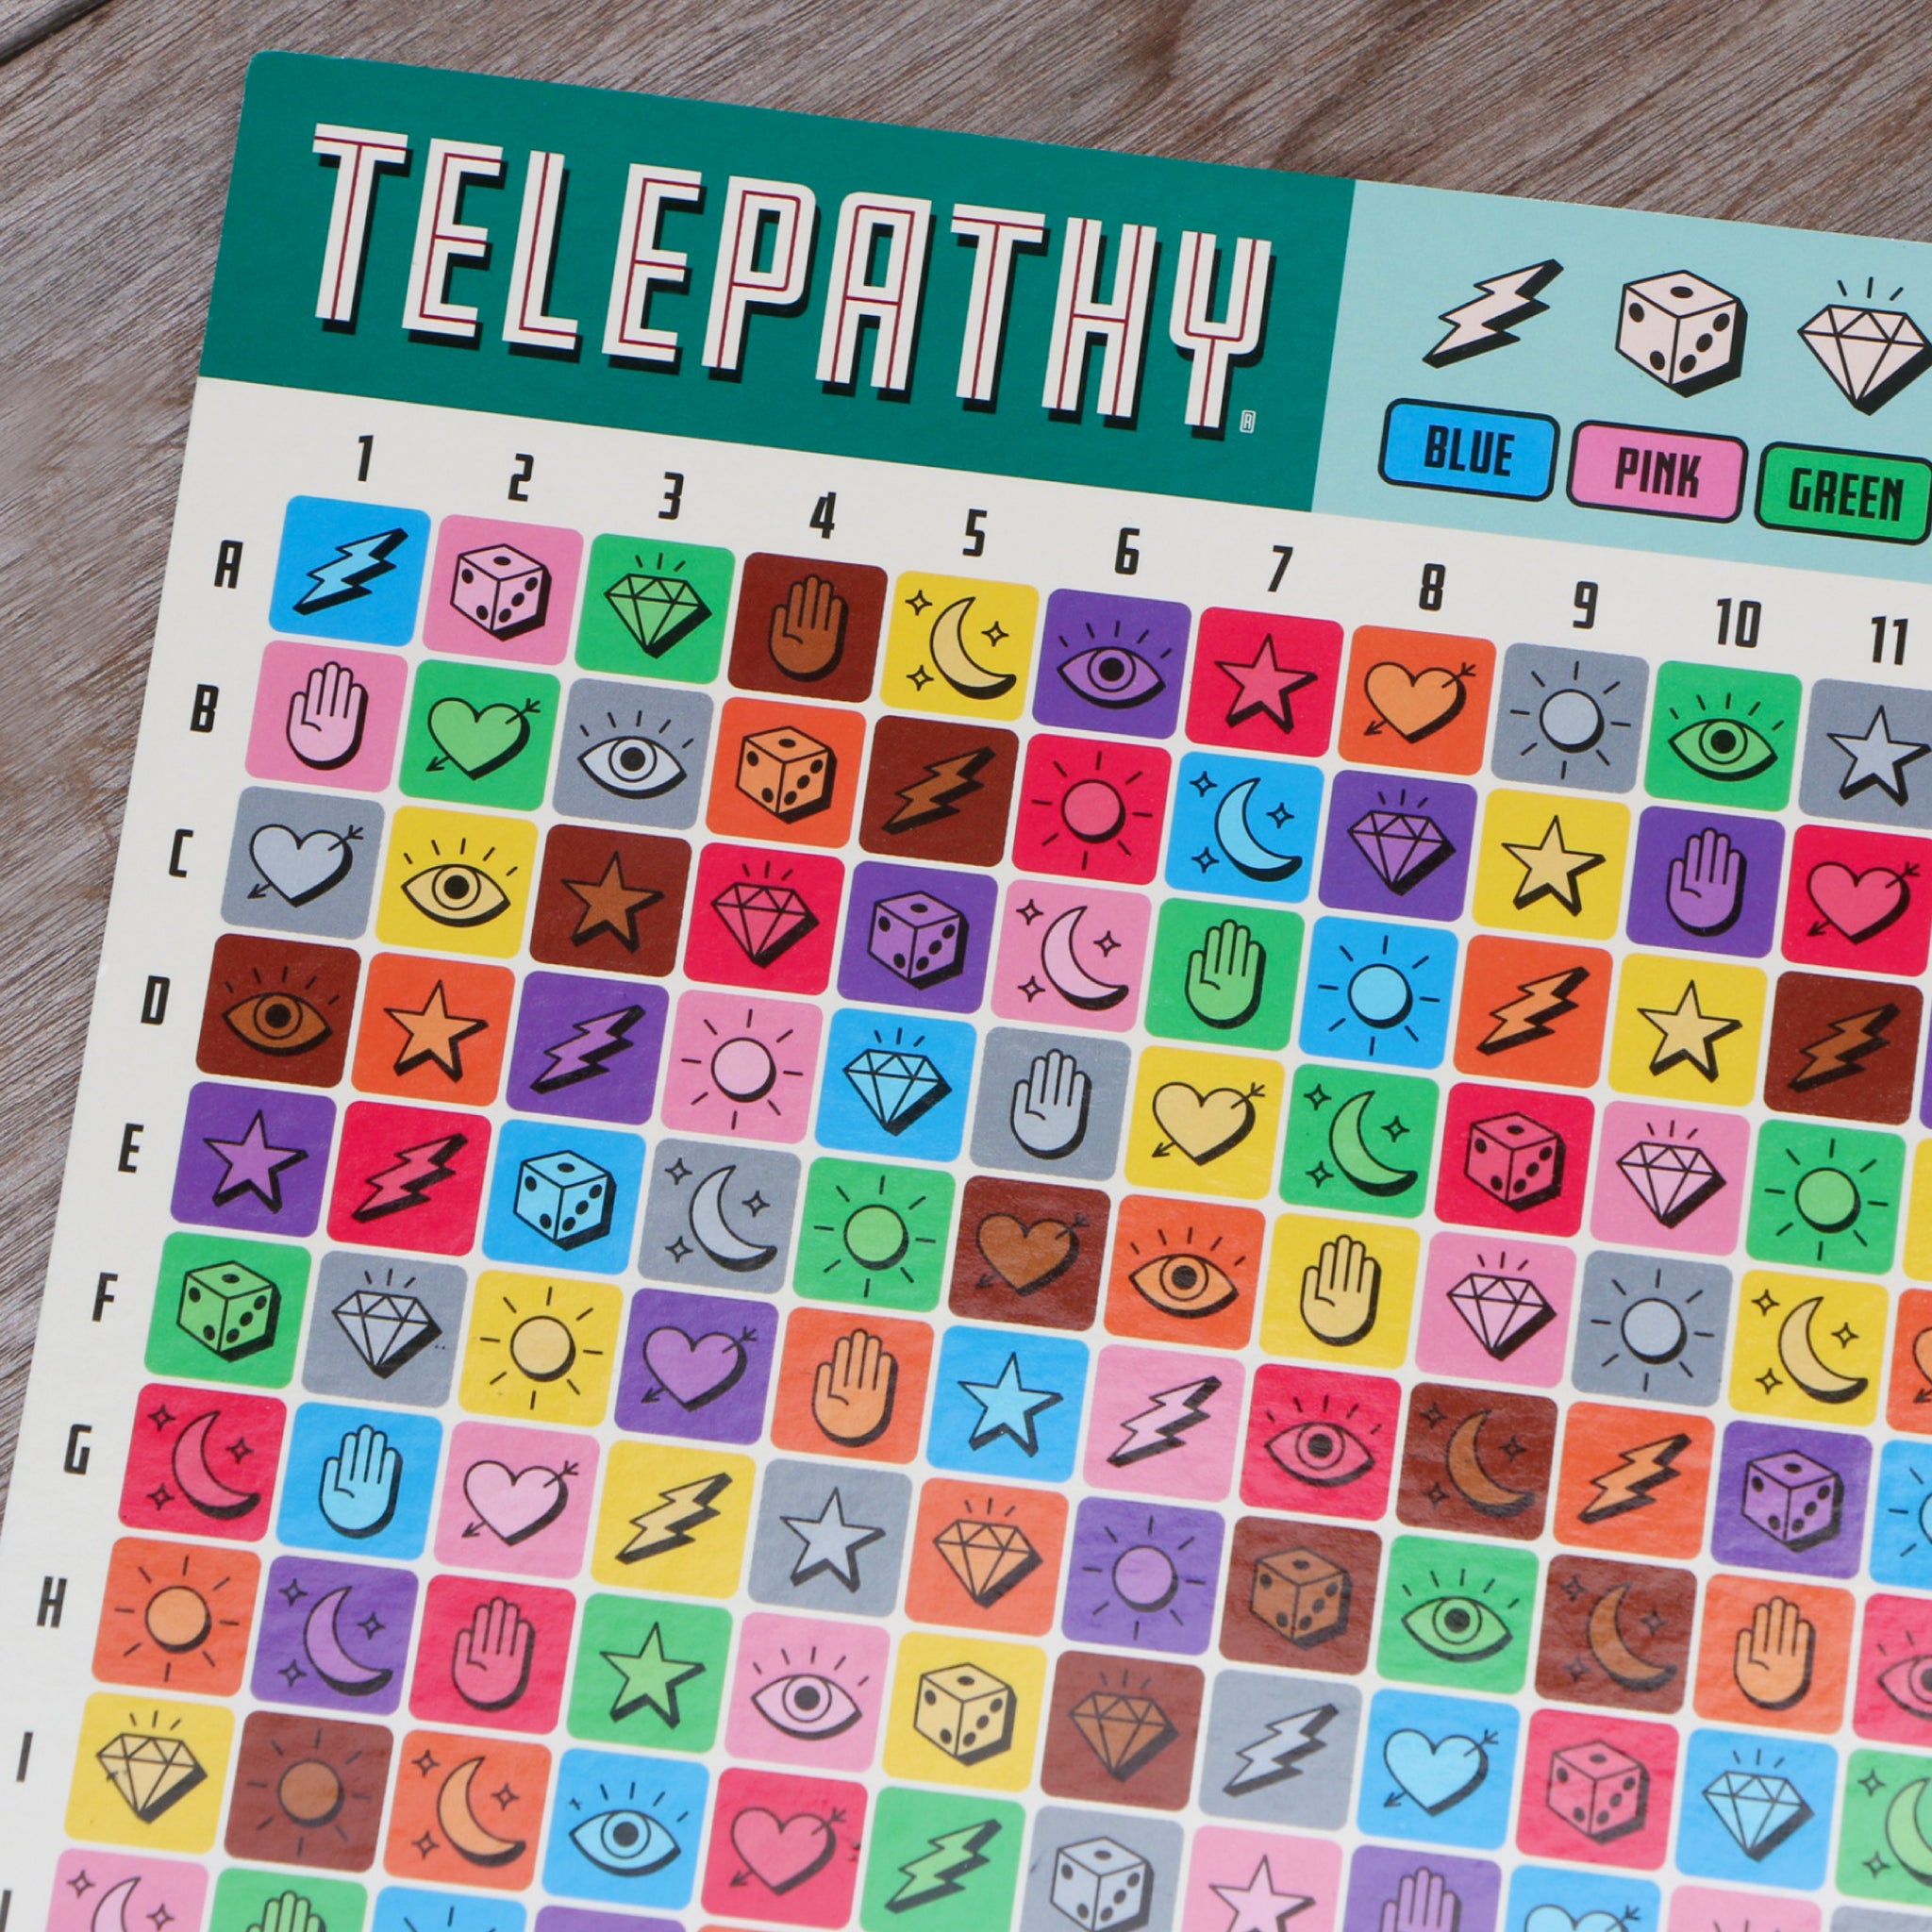 Telepathy Strategy board game details. Game Board being used. For Ages 10 up by Mighty Fun!